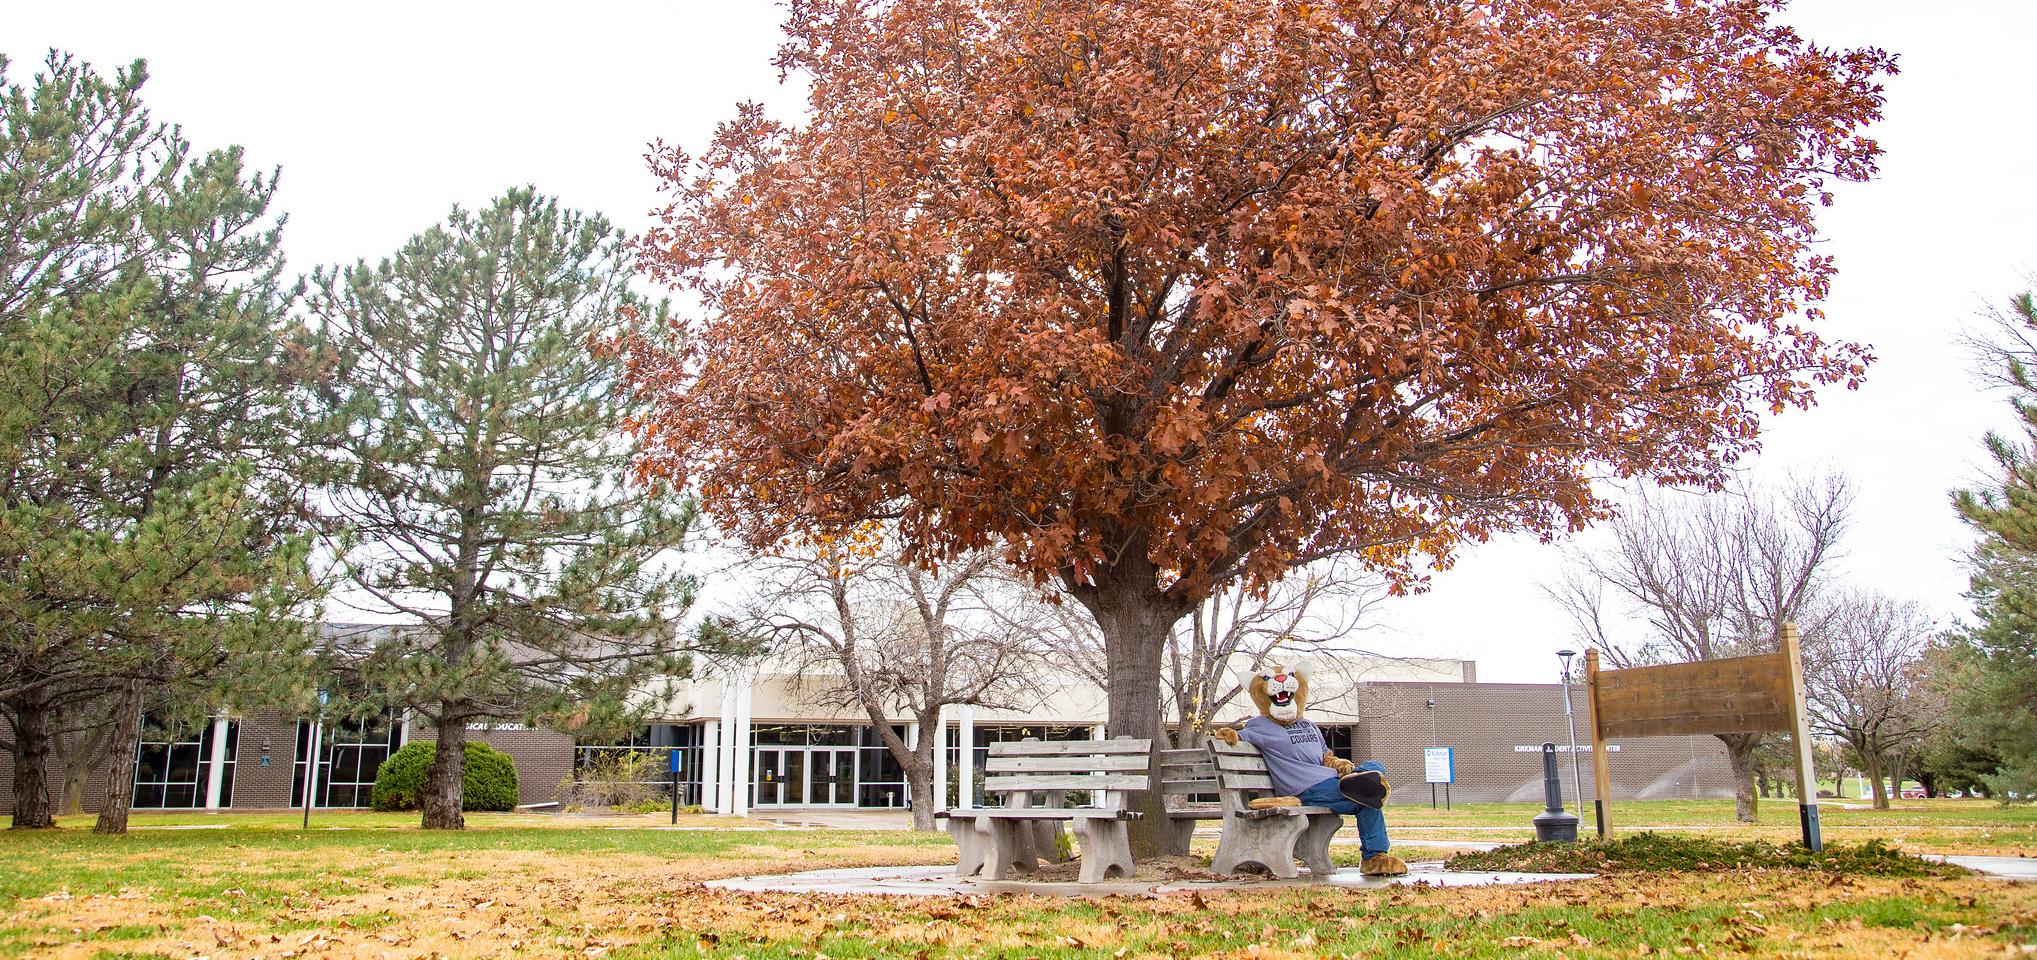 Bart sits on a campus bench in the fall